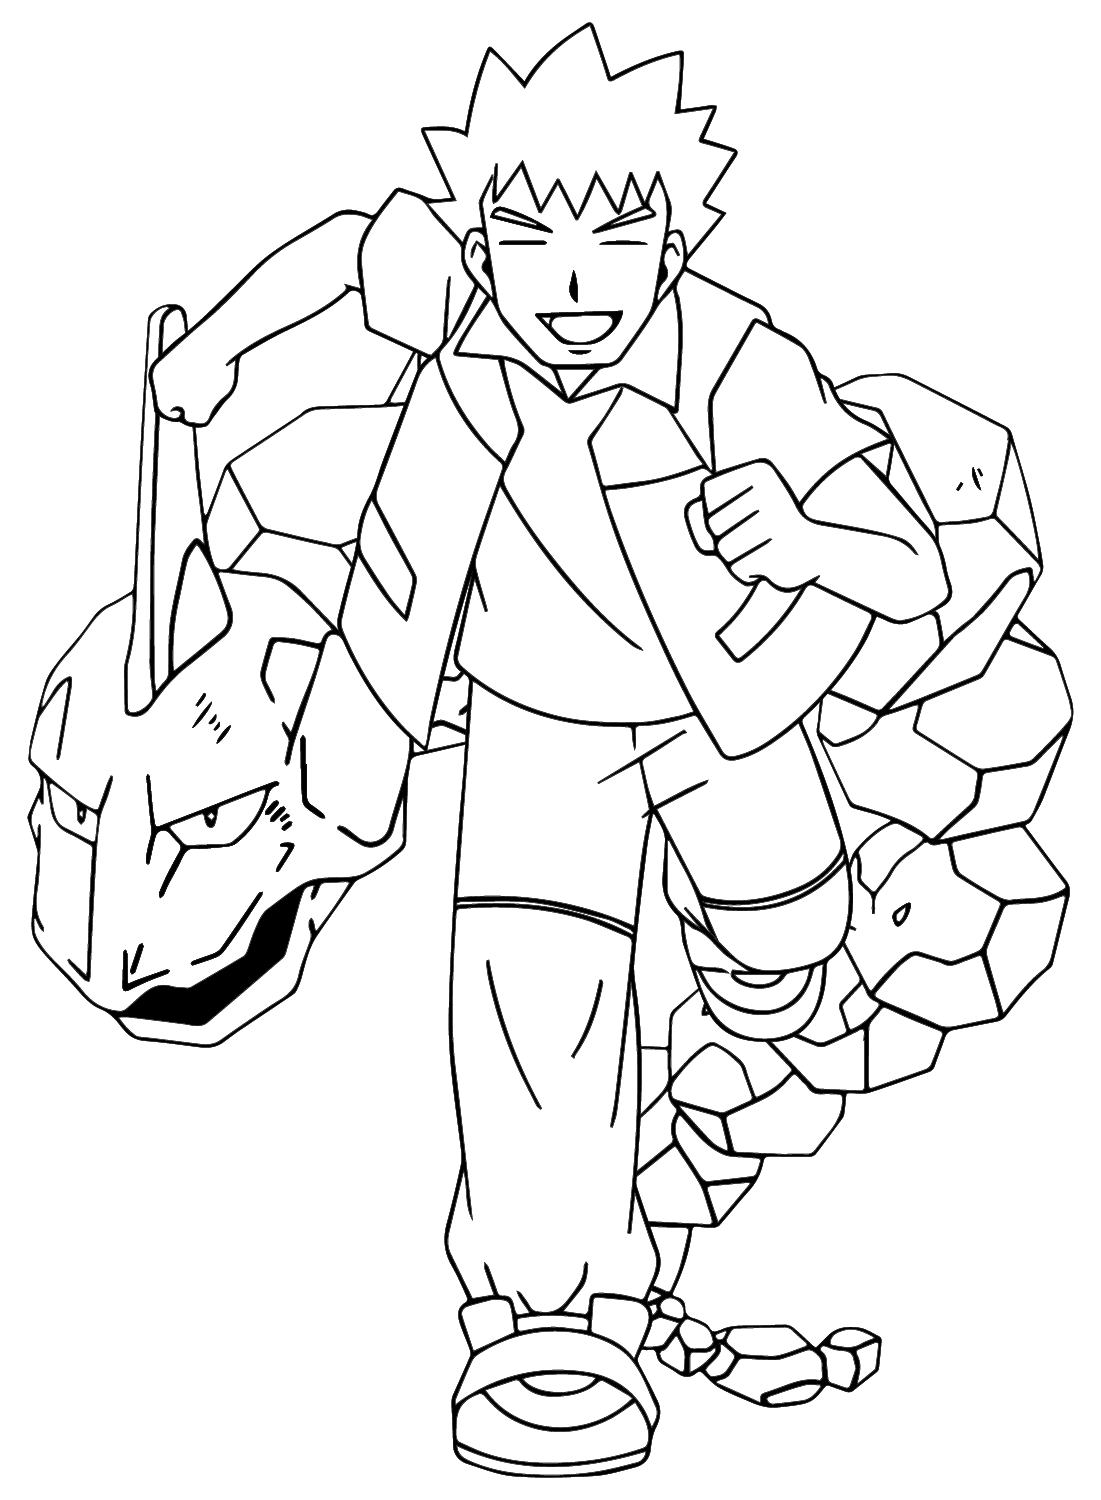 Brock Pokemon Coloring Page from Brock